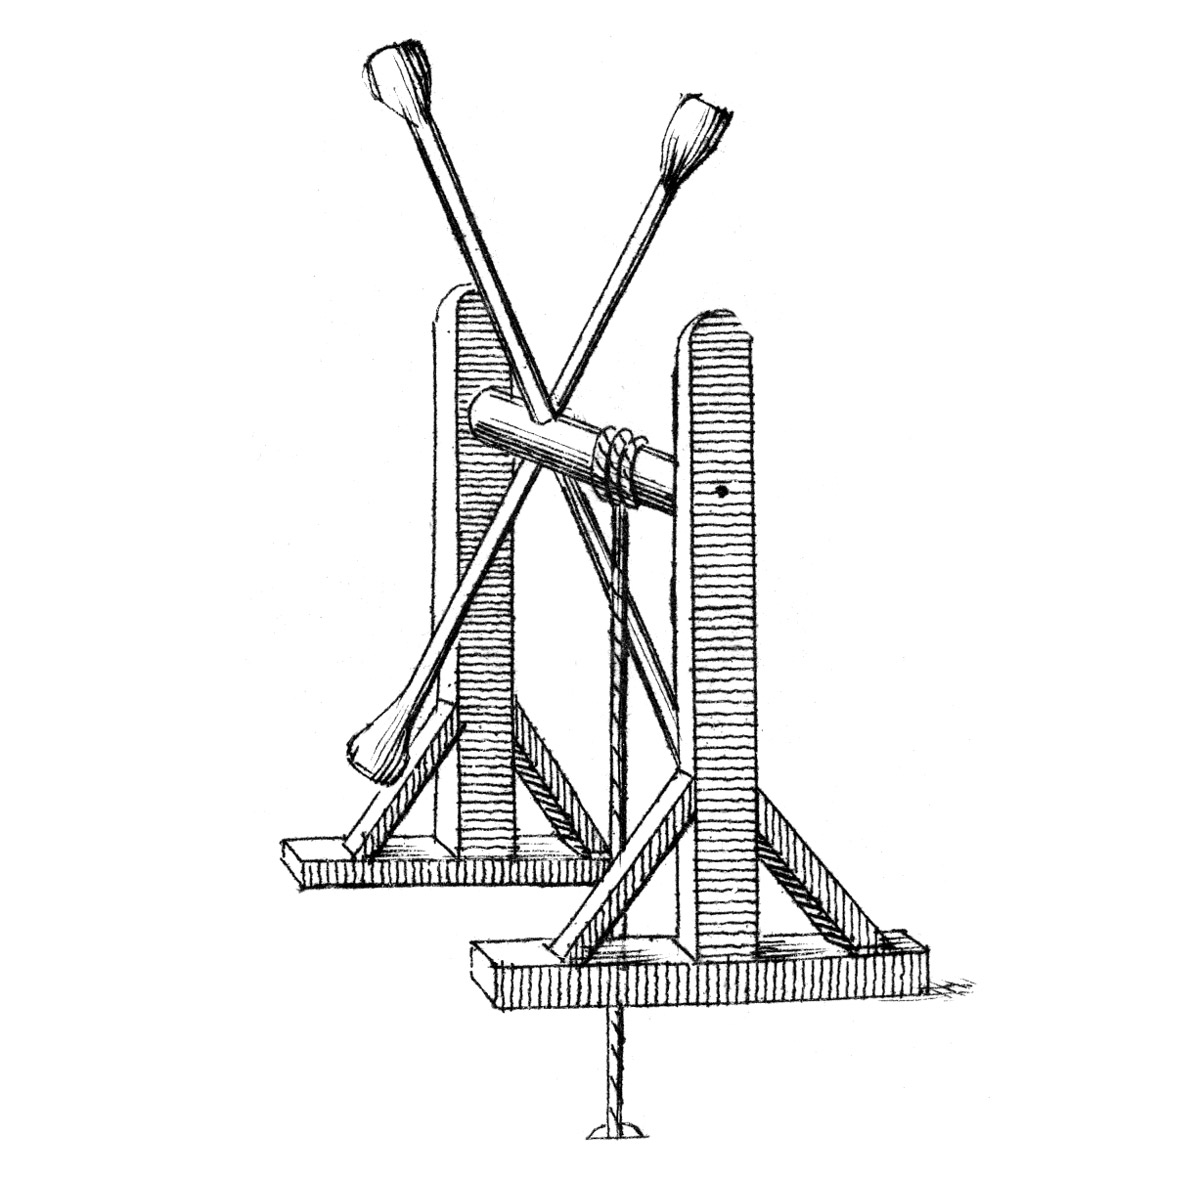 An illustration from “The Gentleman’s Magazine,” seventeen forty-six, depicting exercise apparatus constructed on the model of bell-ringing. By replacing the noisy bell with two weighted bars, the apparatus could provide a silent workout.